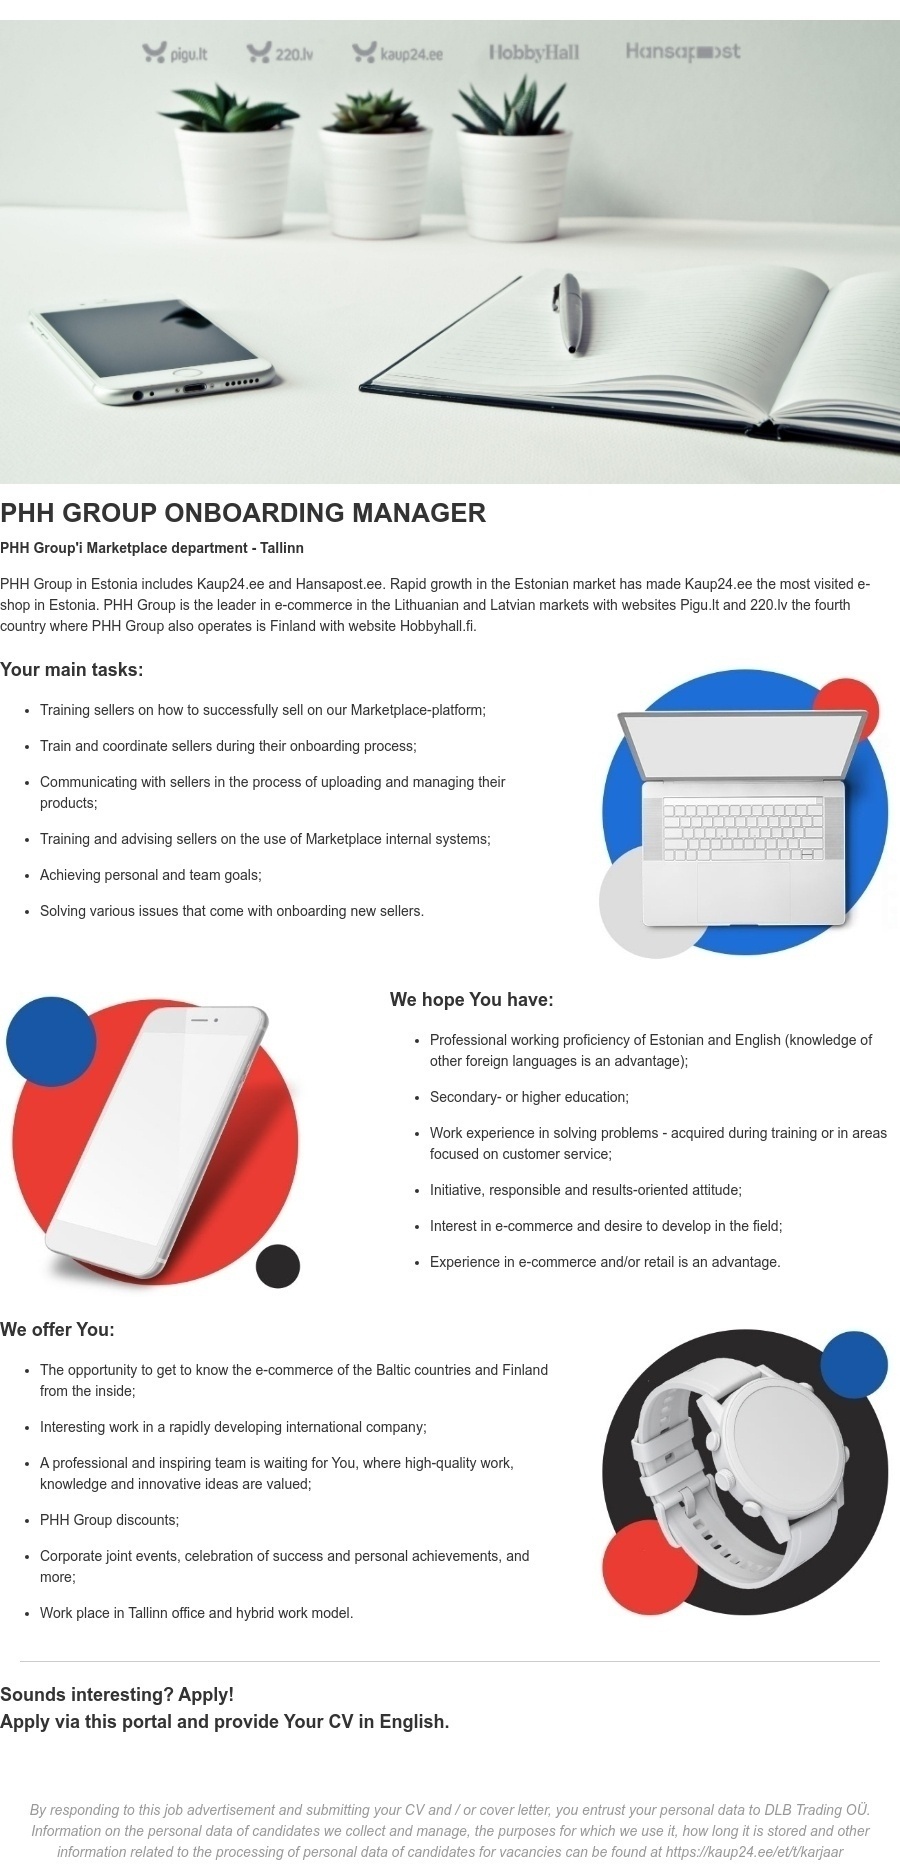 DLB TRADING OÜ Onboarding Manager